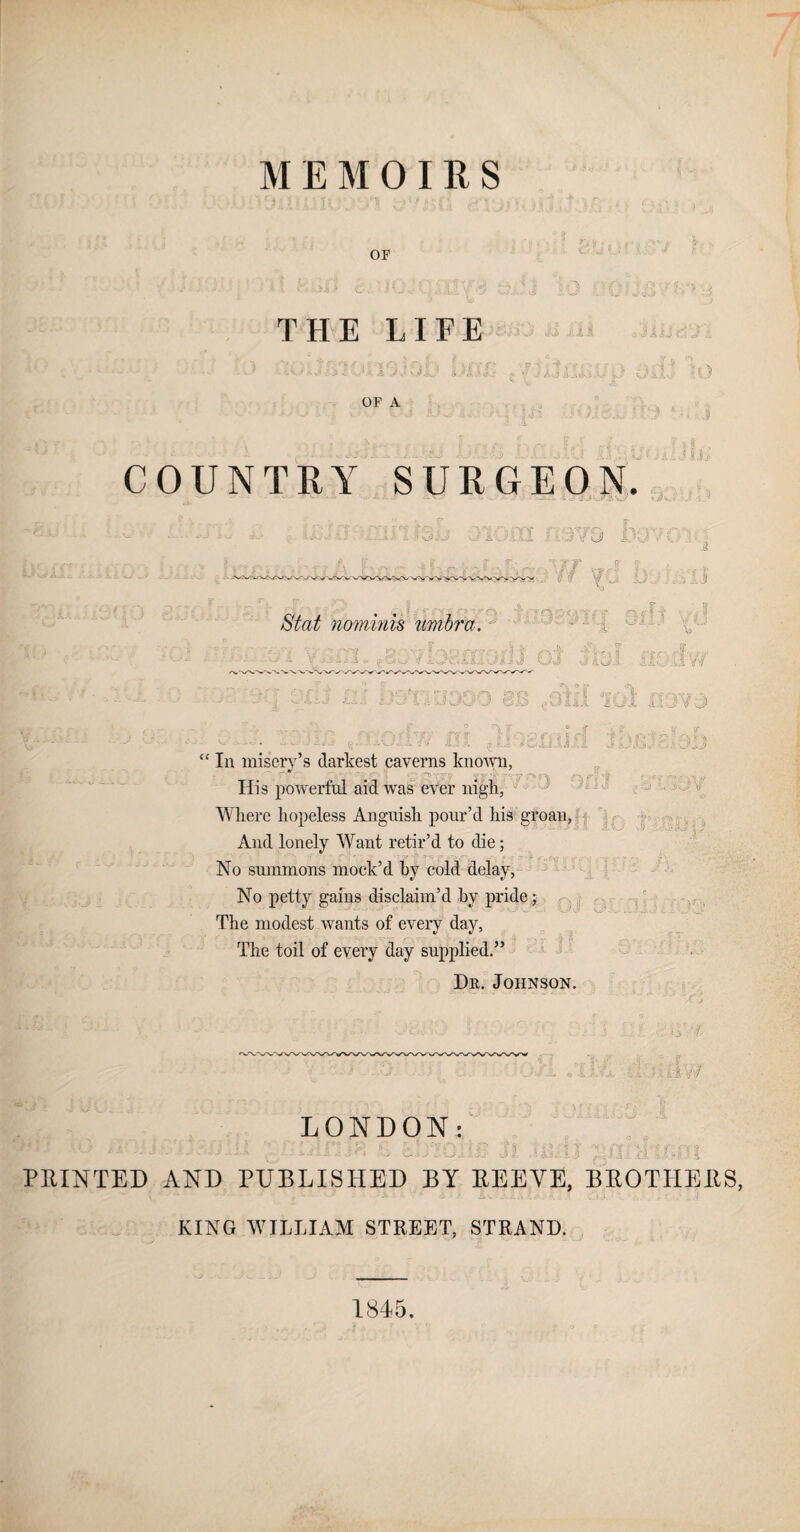 MEMOIRS of THE LIFE JAJj OF A COUNTRY SURGEON. JU ii 13 «f i ■?m do ' •jr jr I? j  ^ Di nominis umbra. n too! jOUO BB ,OliI 101 XI9V3 17 31} 1 i J W-J {.07 'fv ■ * A si! ' * > ?r • In misery’s darkest caverns known, • - ~' \ ^ r* y • iV - - r. ., Ilis powerful aid was ever nigh, Where hopeless Anguish pour’d his groan, And lonely Want retir’d to die; No summons mock’d hv cold delay, No petty gains disclaim’d by pride; The modest wants of every day, The toil of every day supplied.” Dr. Johnson. \ «j> :' { ; F ■ .'i* ; f LONDON: *’ • A ..1 . v iJf■*.A *- -i'Oil At O i. ,\ jj i. 1} i j 4 - 4 1 _•*4$ i PRINTED AND PUBLISHED BY REEYE, BROTHERS, •• ... KING WILLIAM STREET, STRAND. 1845.